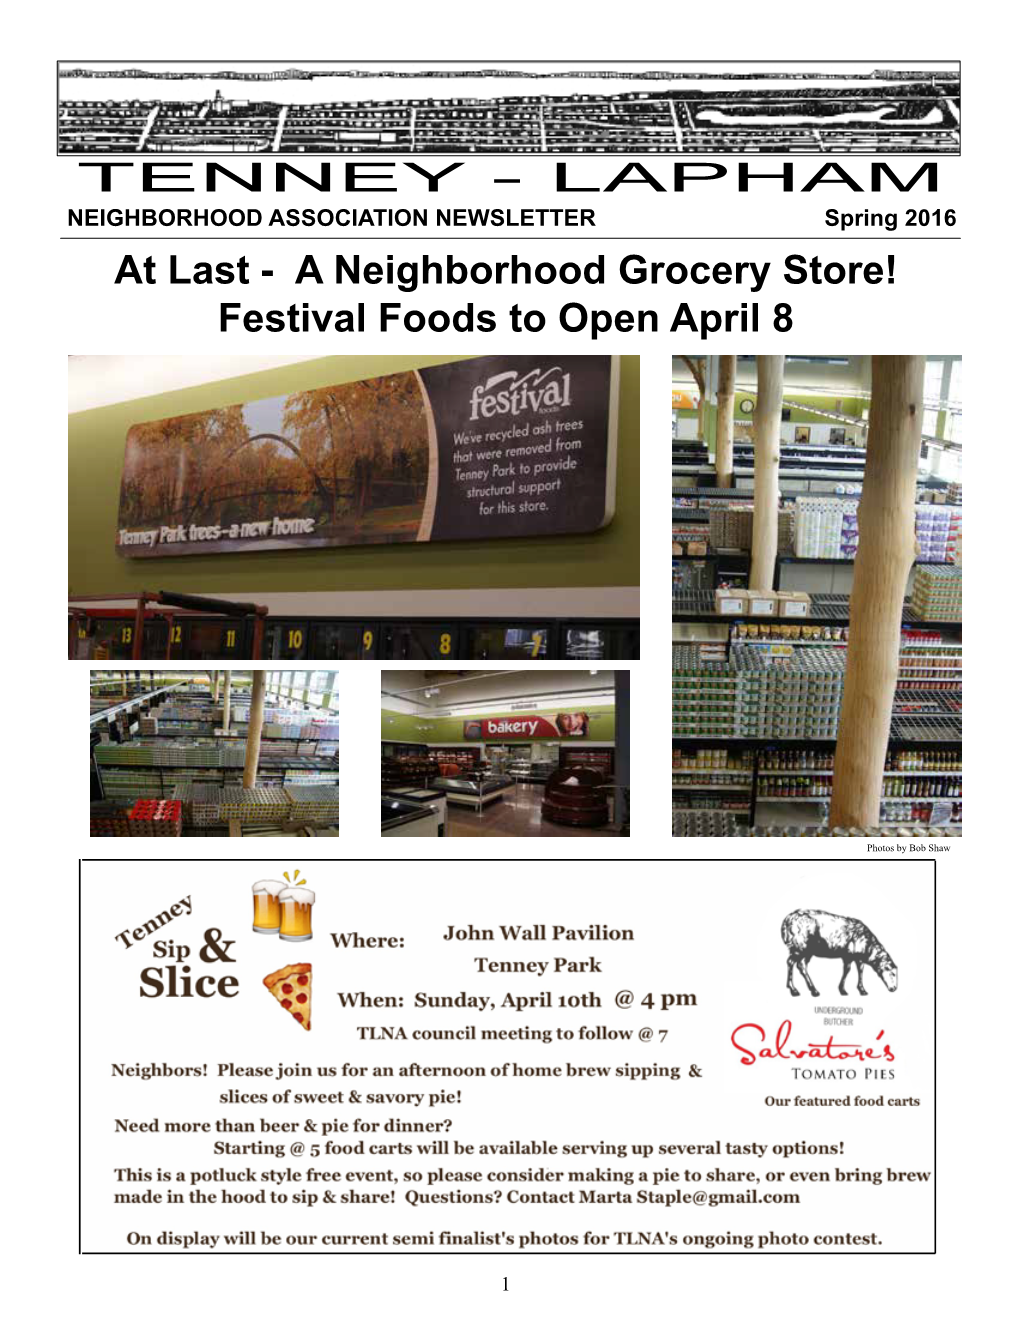 Spring 2016 at Last - a Neighborhood Grocery Store! Festival Foods to Open April 8